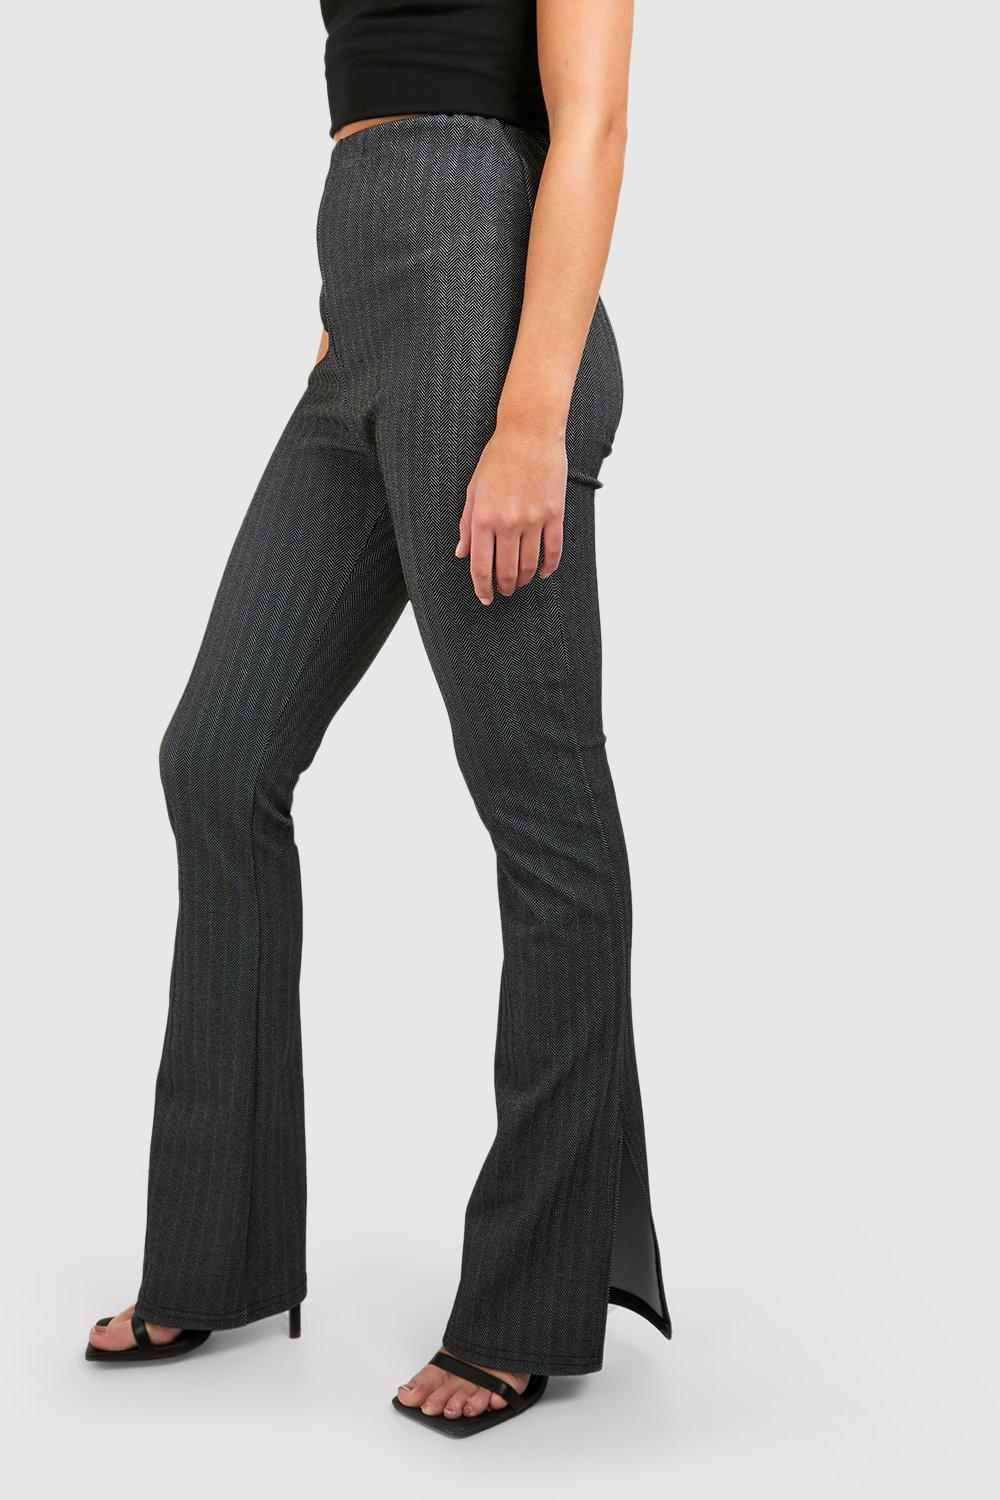 Topshop rib flare trousers in grey